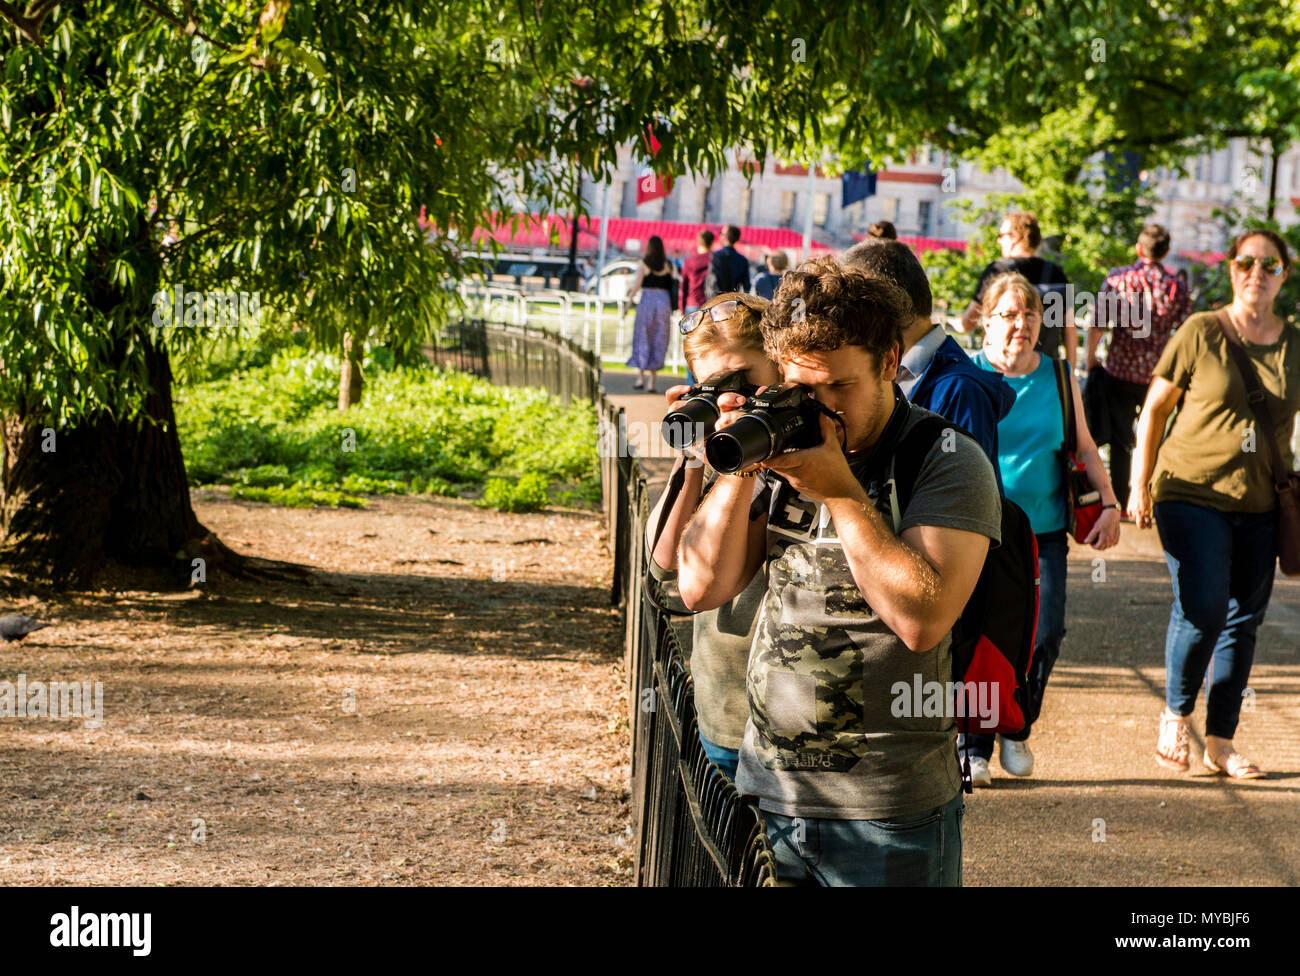 Two people photographing subject out of shot, with long lenses pointed in the same direction, St James's Park, London, England, UK Stock Photo